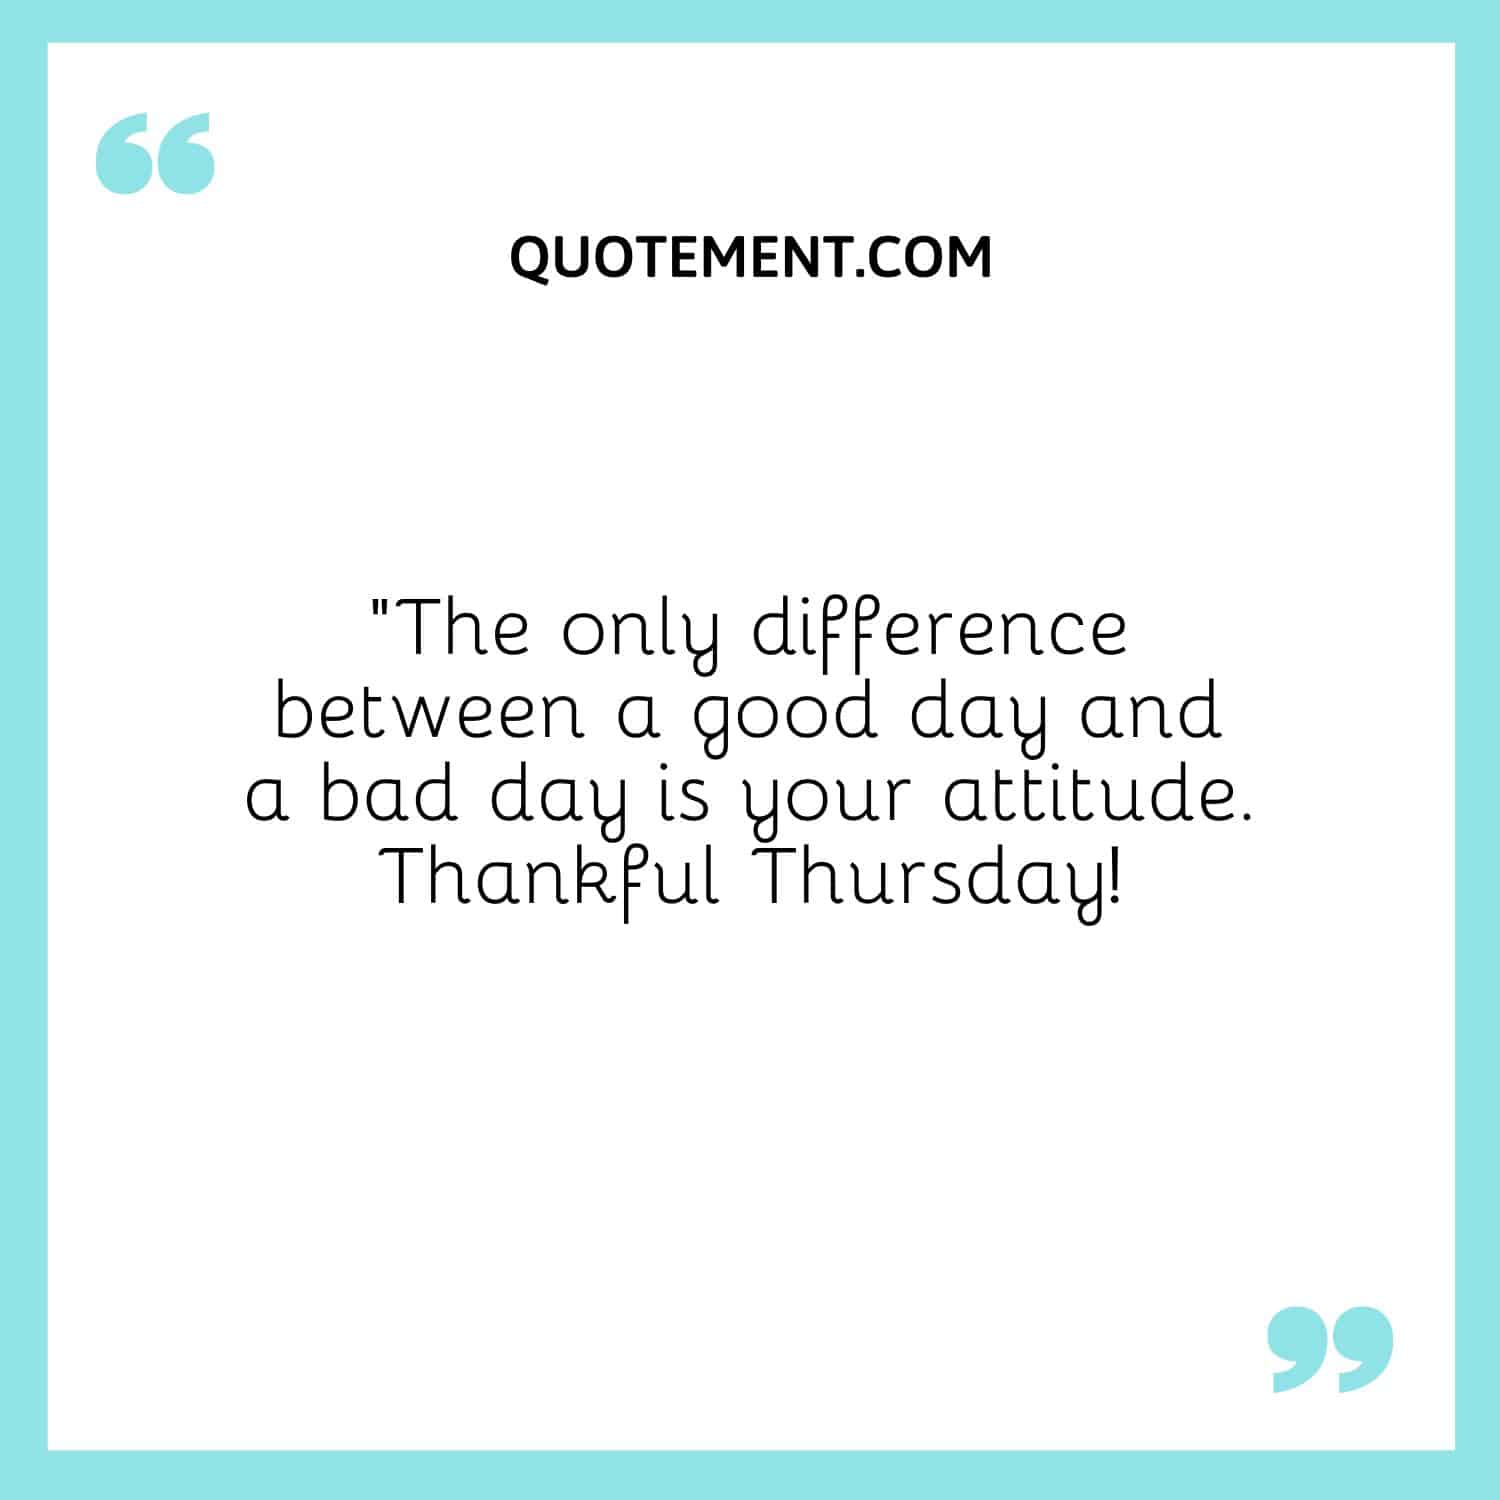 “The only difference between a good day and a bad day is your attitude. Thankful Thursday!”